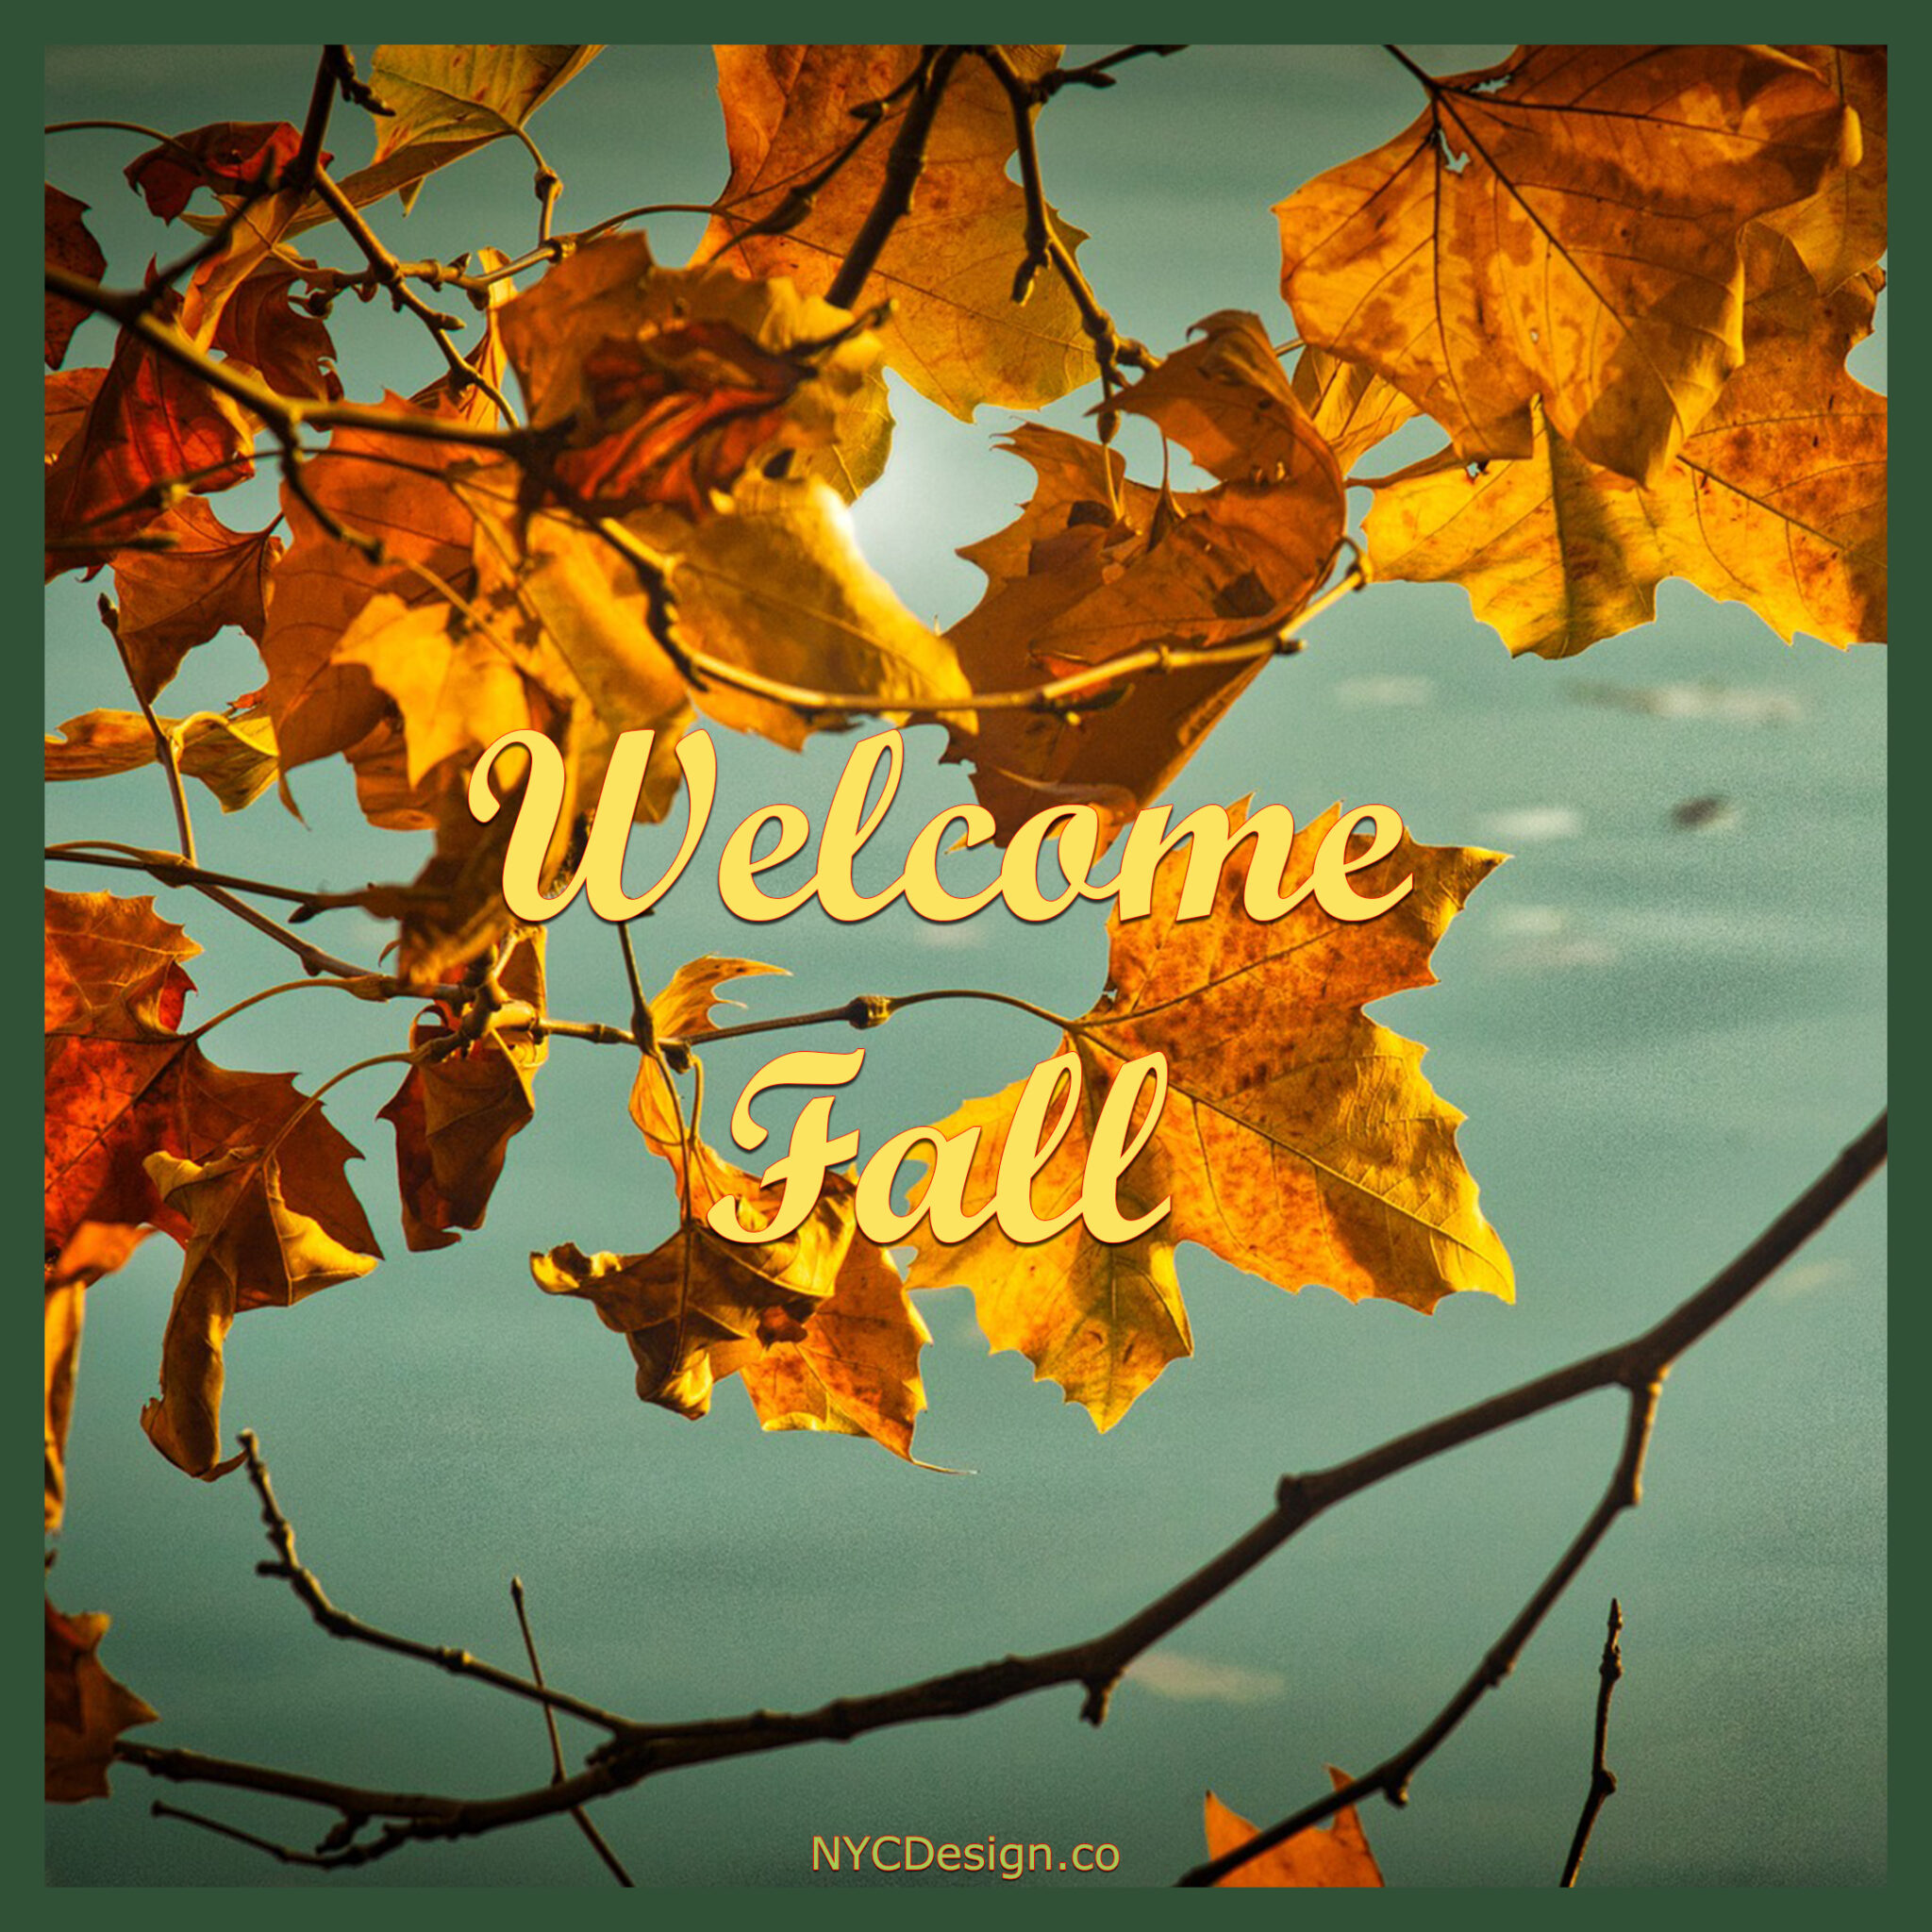 Fall Images, Captions & Quotes NYCDesign.co Calendars